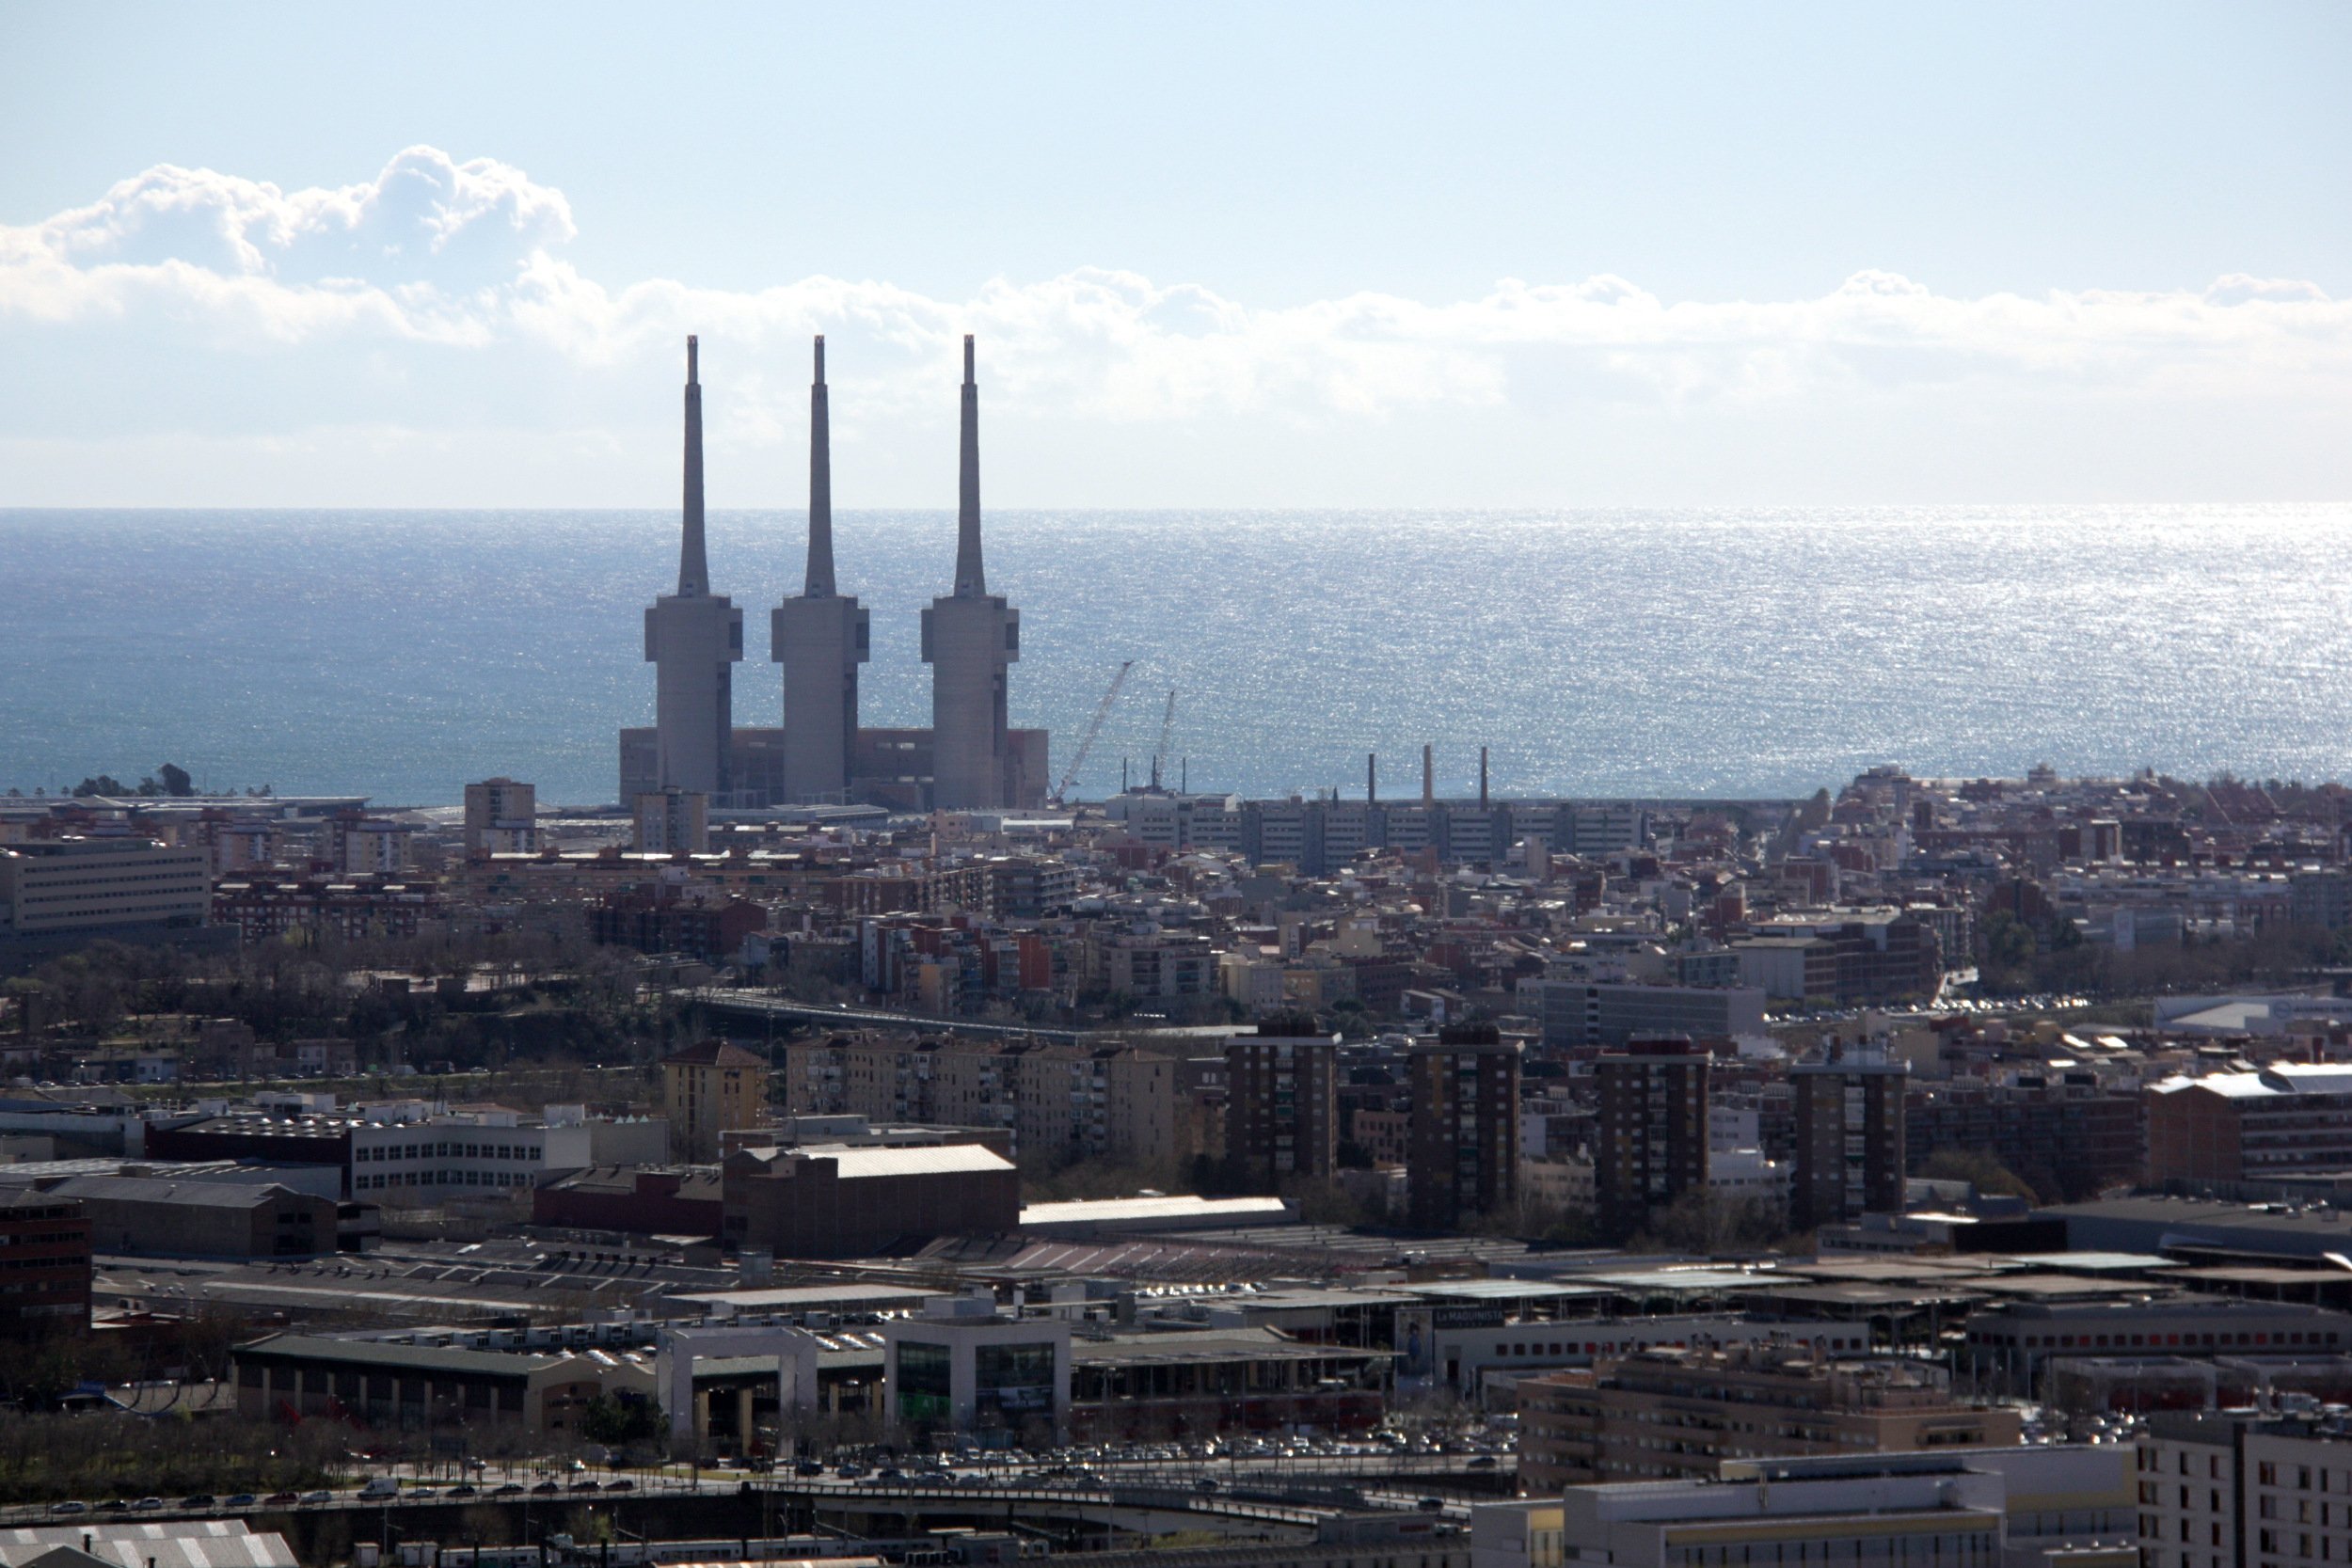 Barcelona consolidates as a sustainable tourism destination